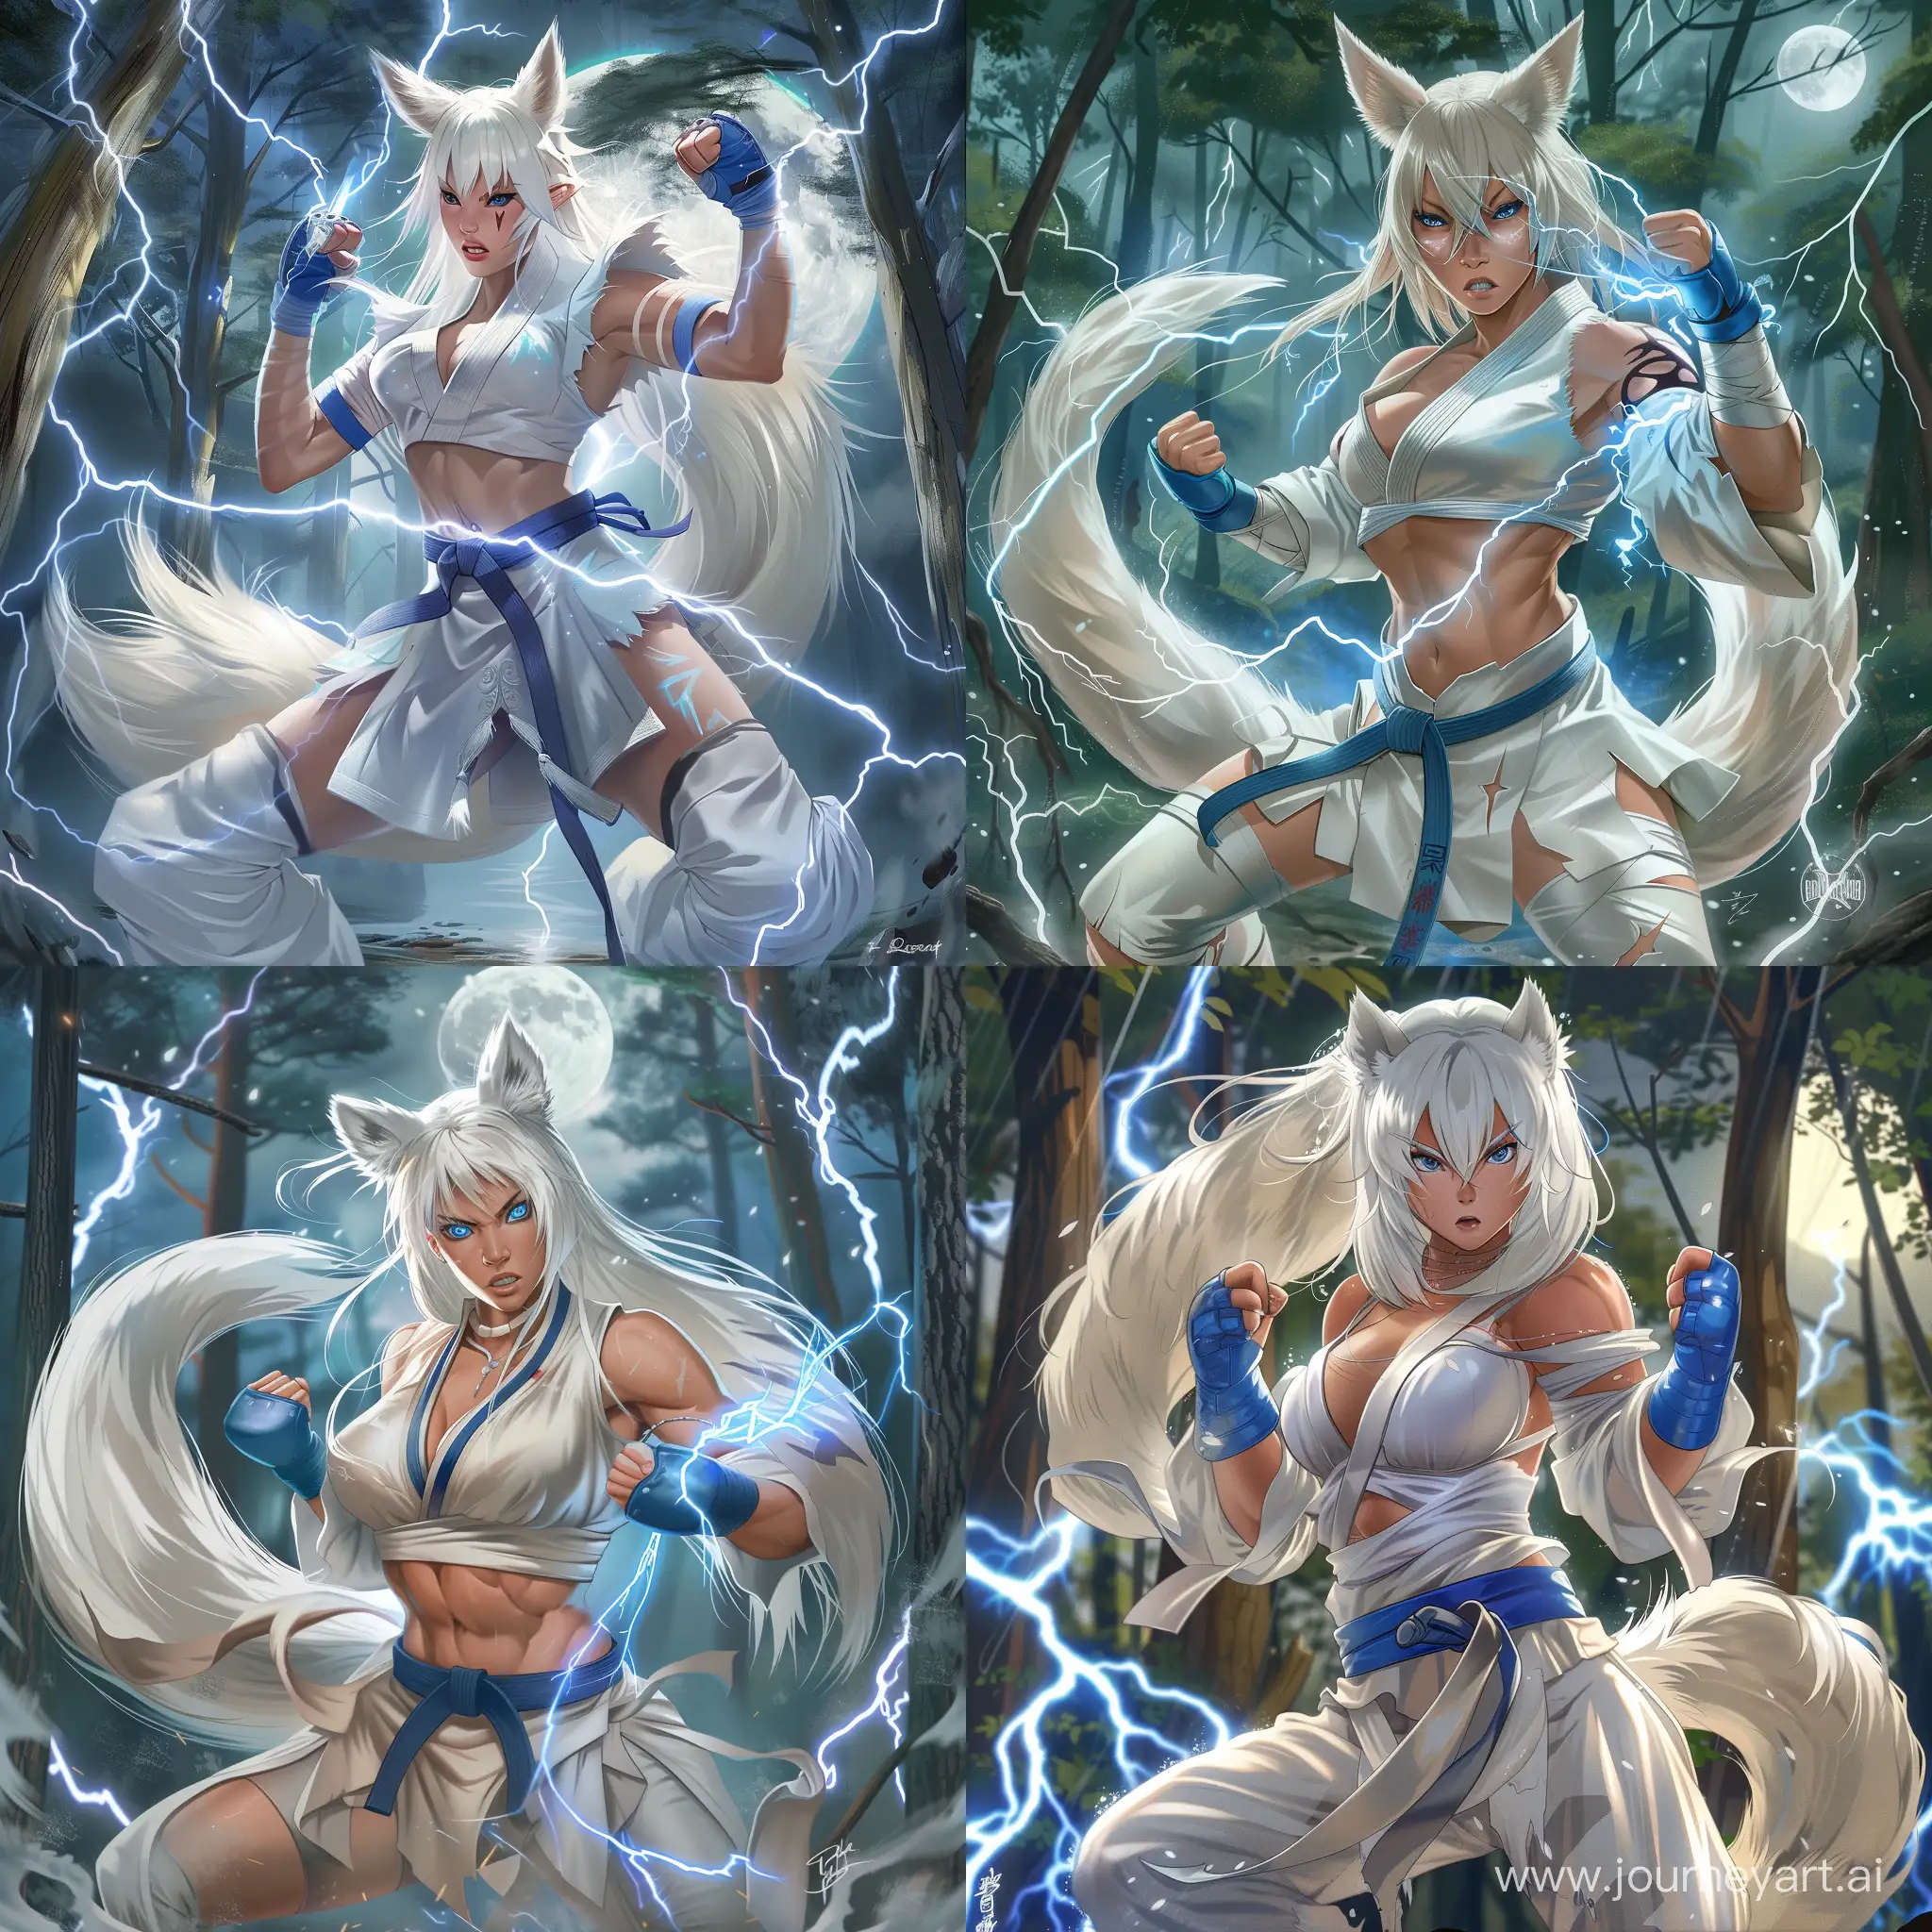 Ethereal-Asian-Warrior-Summoning-Lightning-Magic-in-Moonlit-Forest